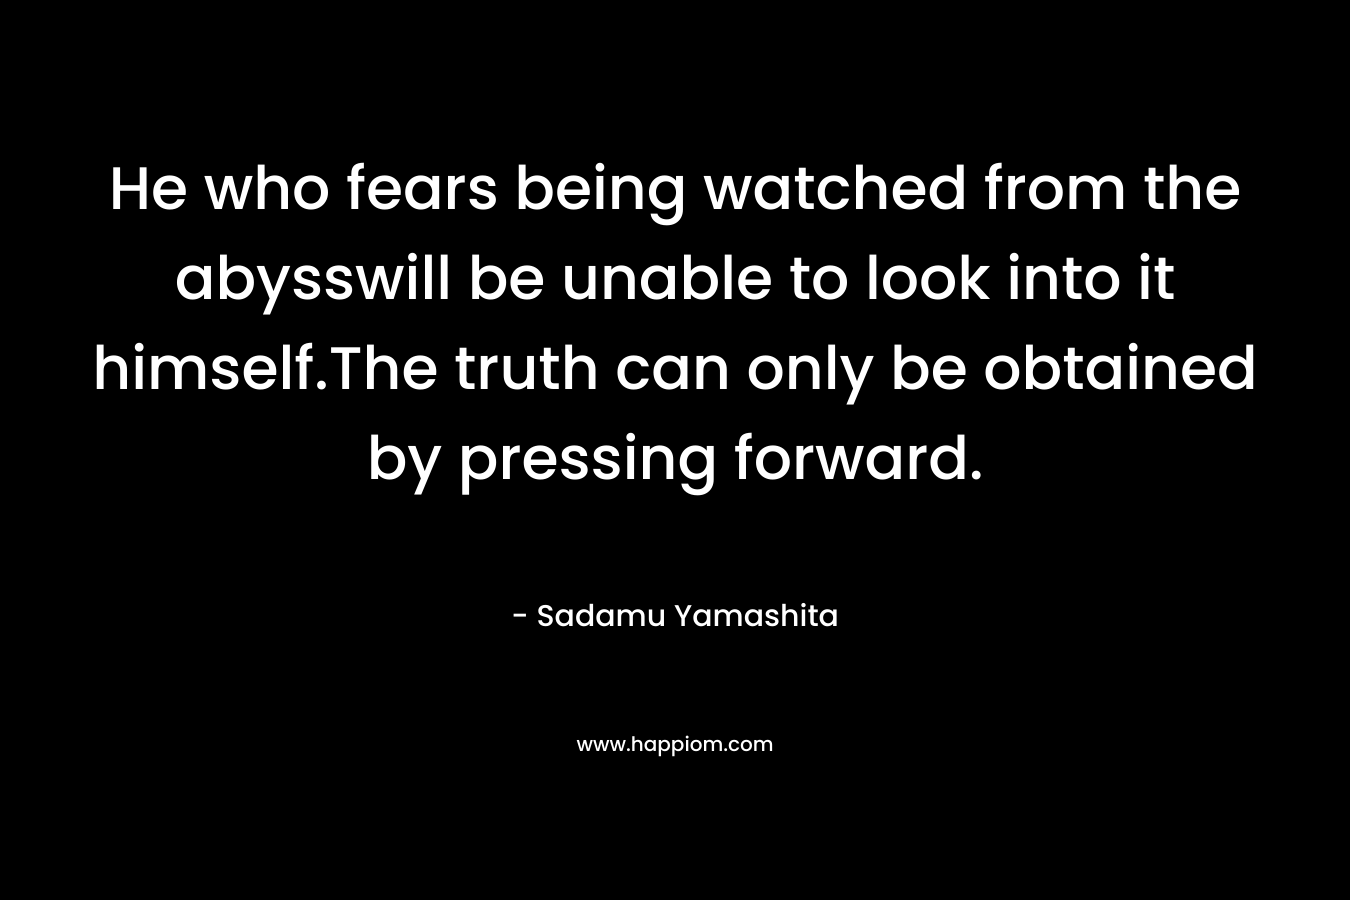 He who fears being watched from the abysswill be unable to look into it himself.The truth can only be obtained by pressing forward. – Sadamu Yamashita